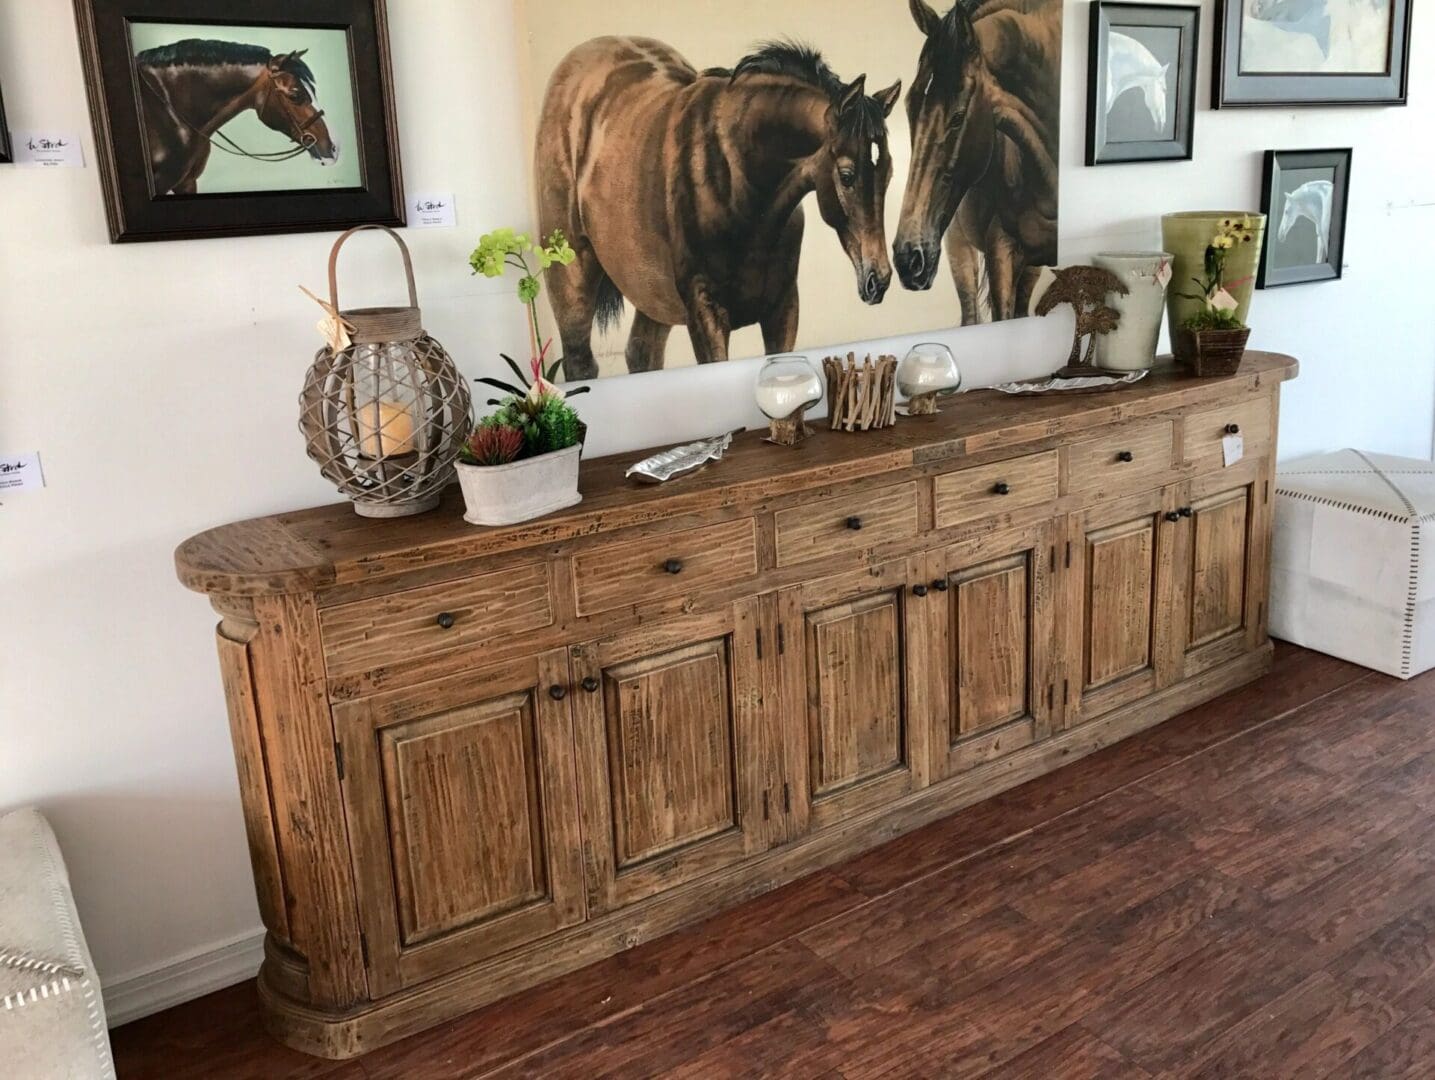 A large wooden buffet with two horses on the wall.